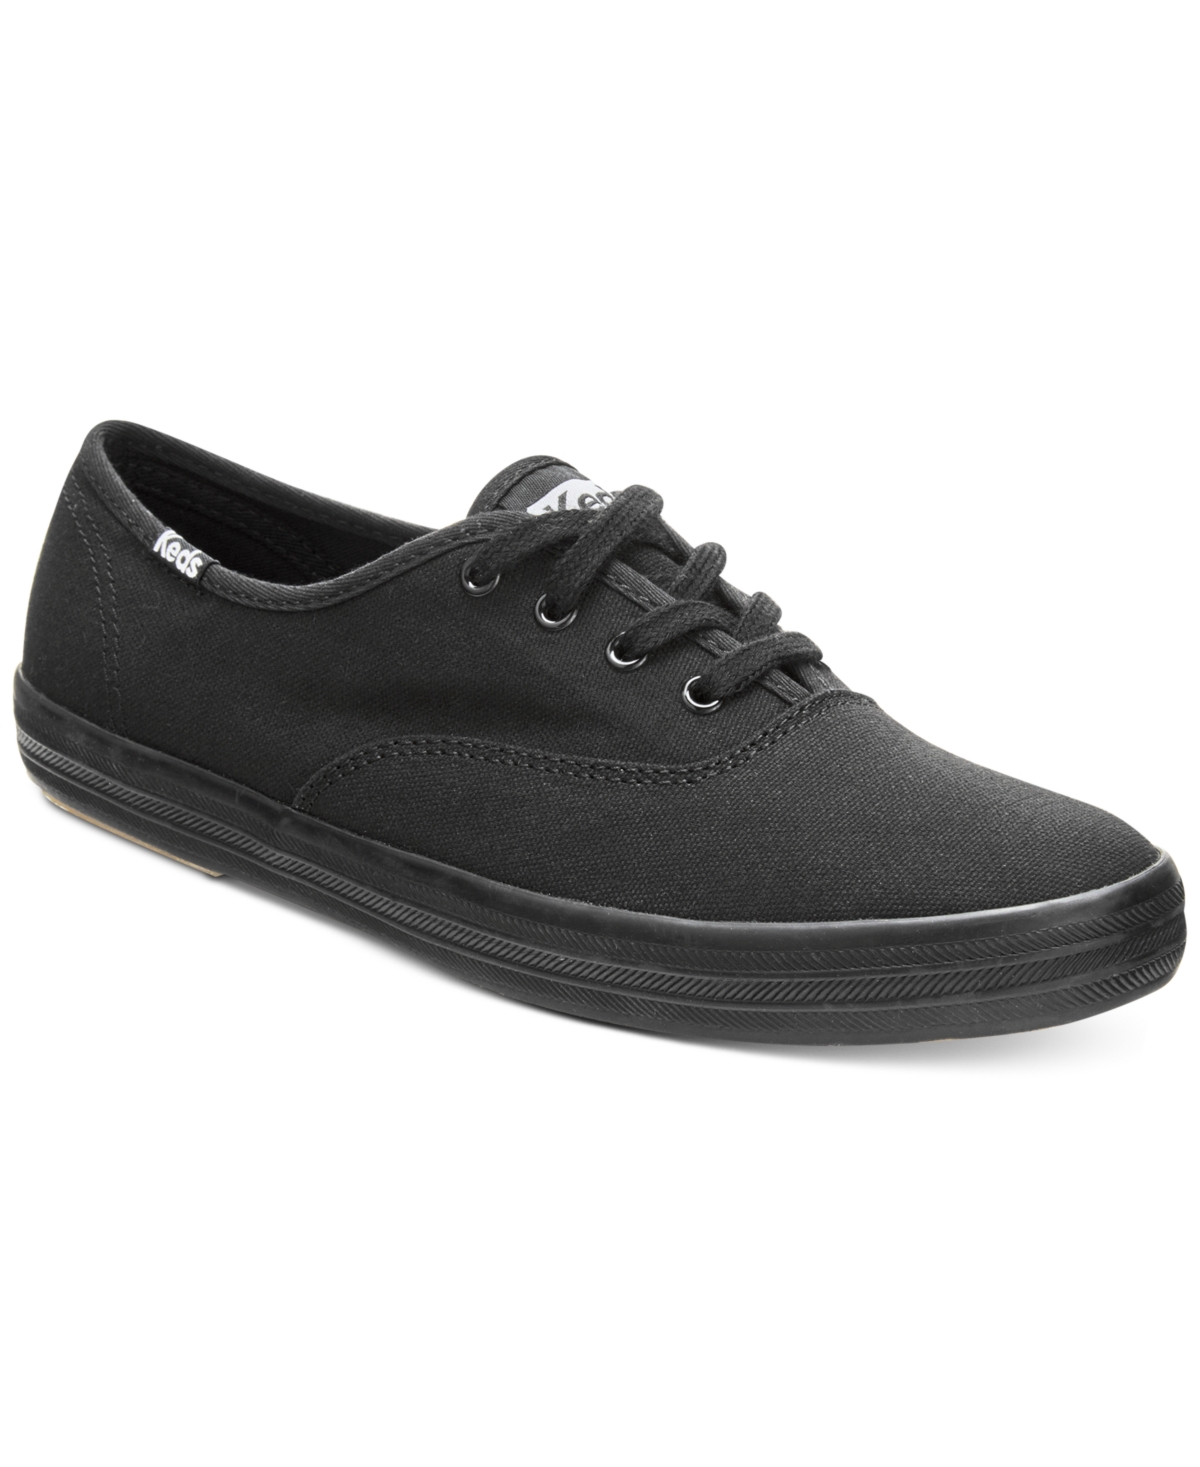 UPC 044208122782 product image for Keds Women's Champion Ortholite Lace-Up Oxford Fashion Sneakers from Finish Line | upcitemdb.com